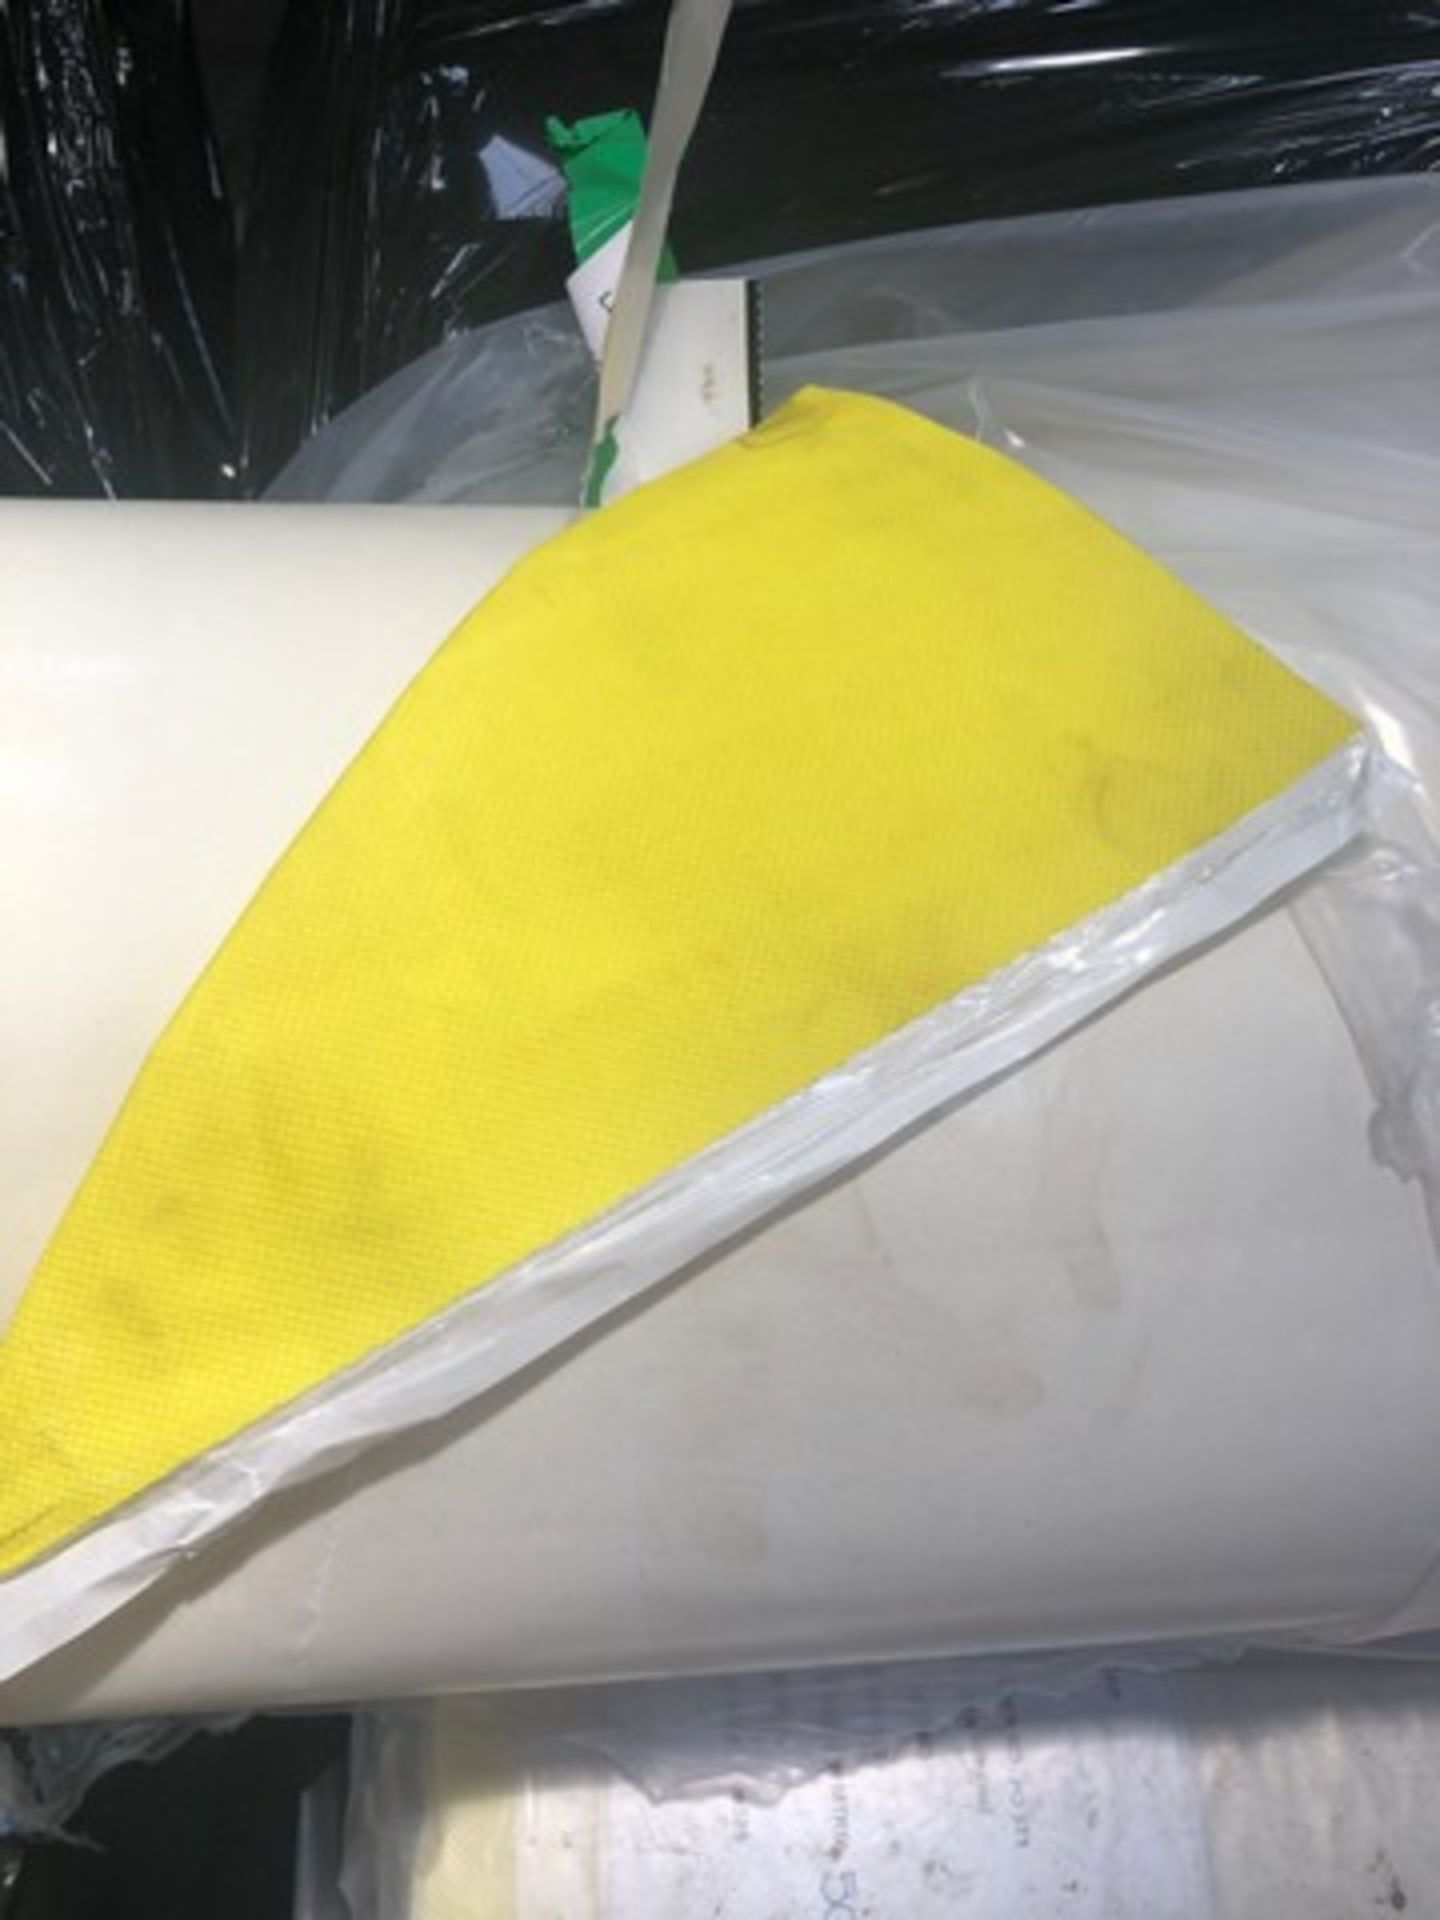 Florprotec duramat floorcovering (yellow) approx 10 rolls - Image 2 of 3